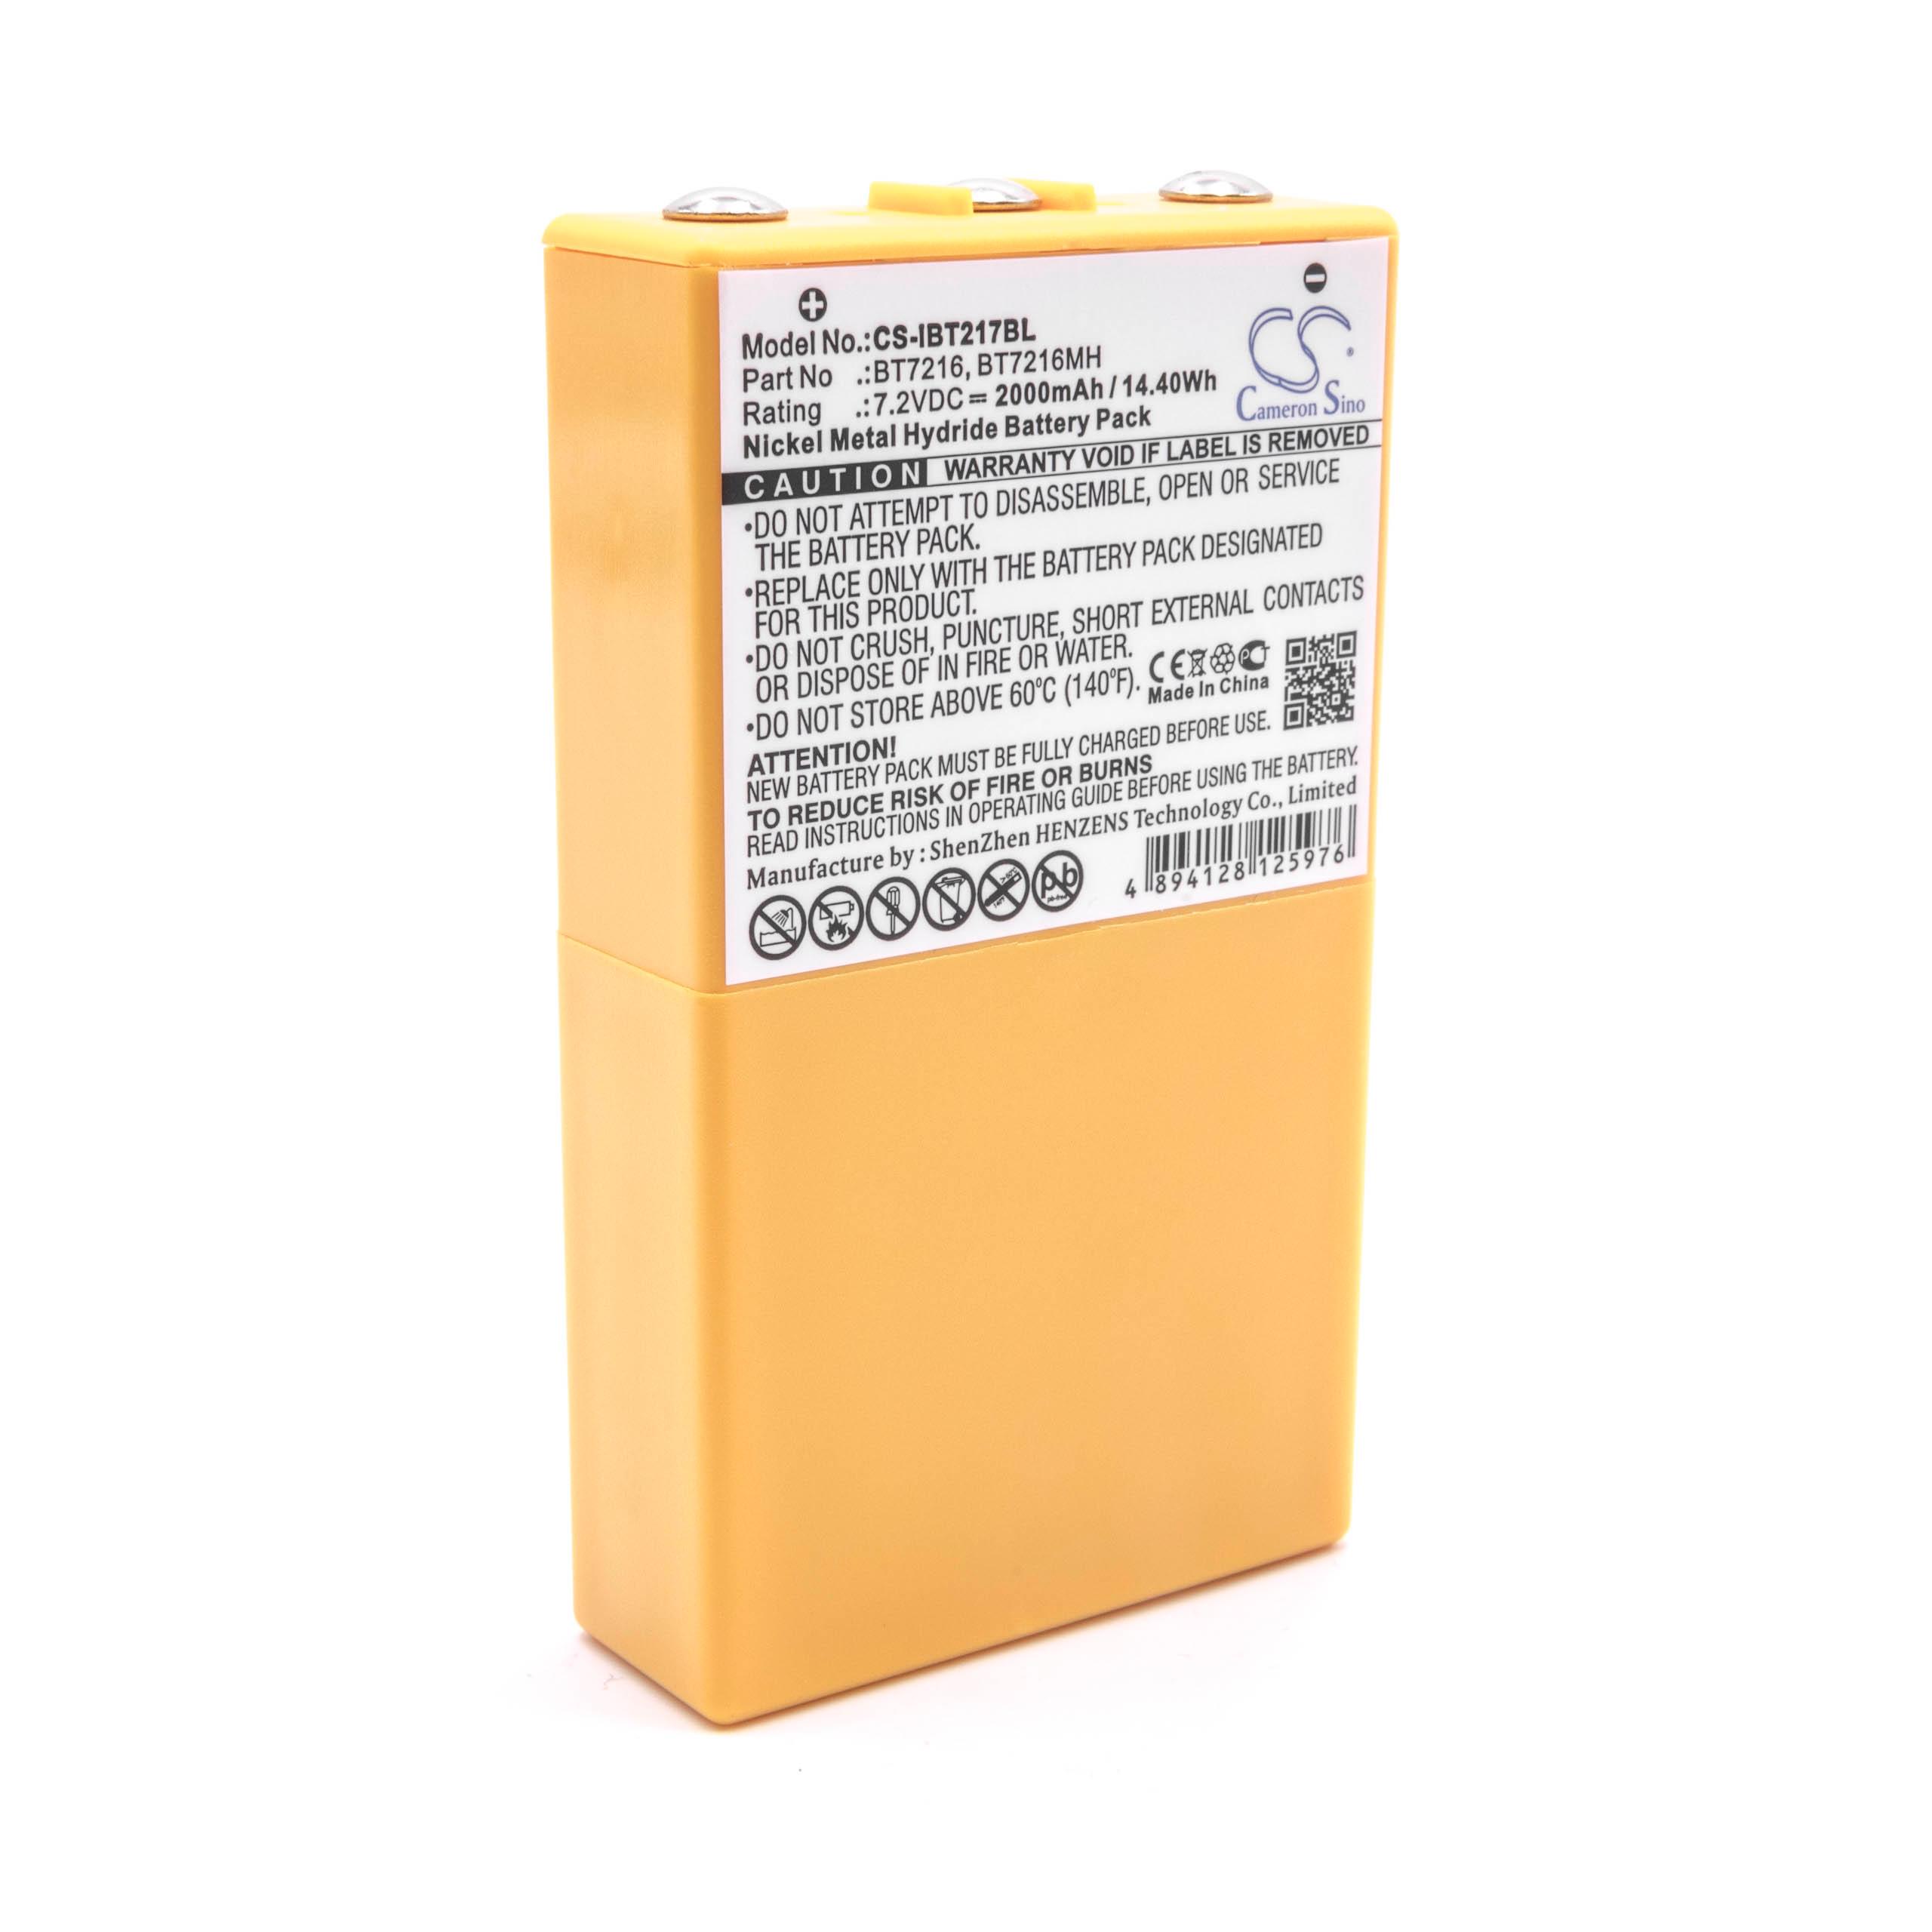 Industrial Remote Control Battery Replacement for Itowa 26.105, BT7216MH, BT7216 - 2000mAh 7.2V NiMH